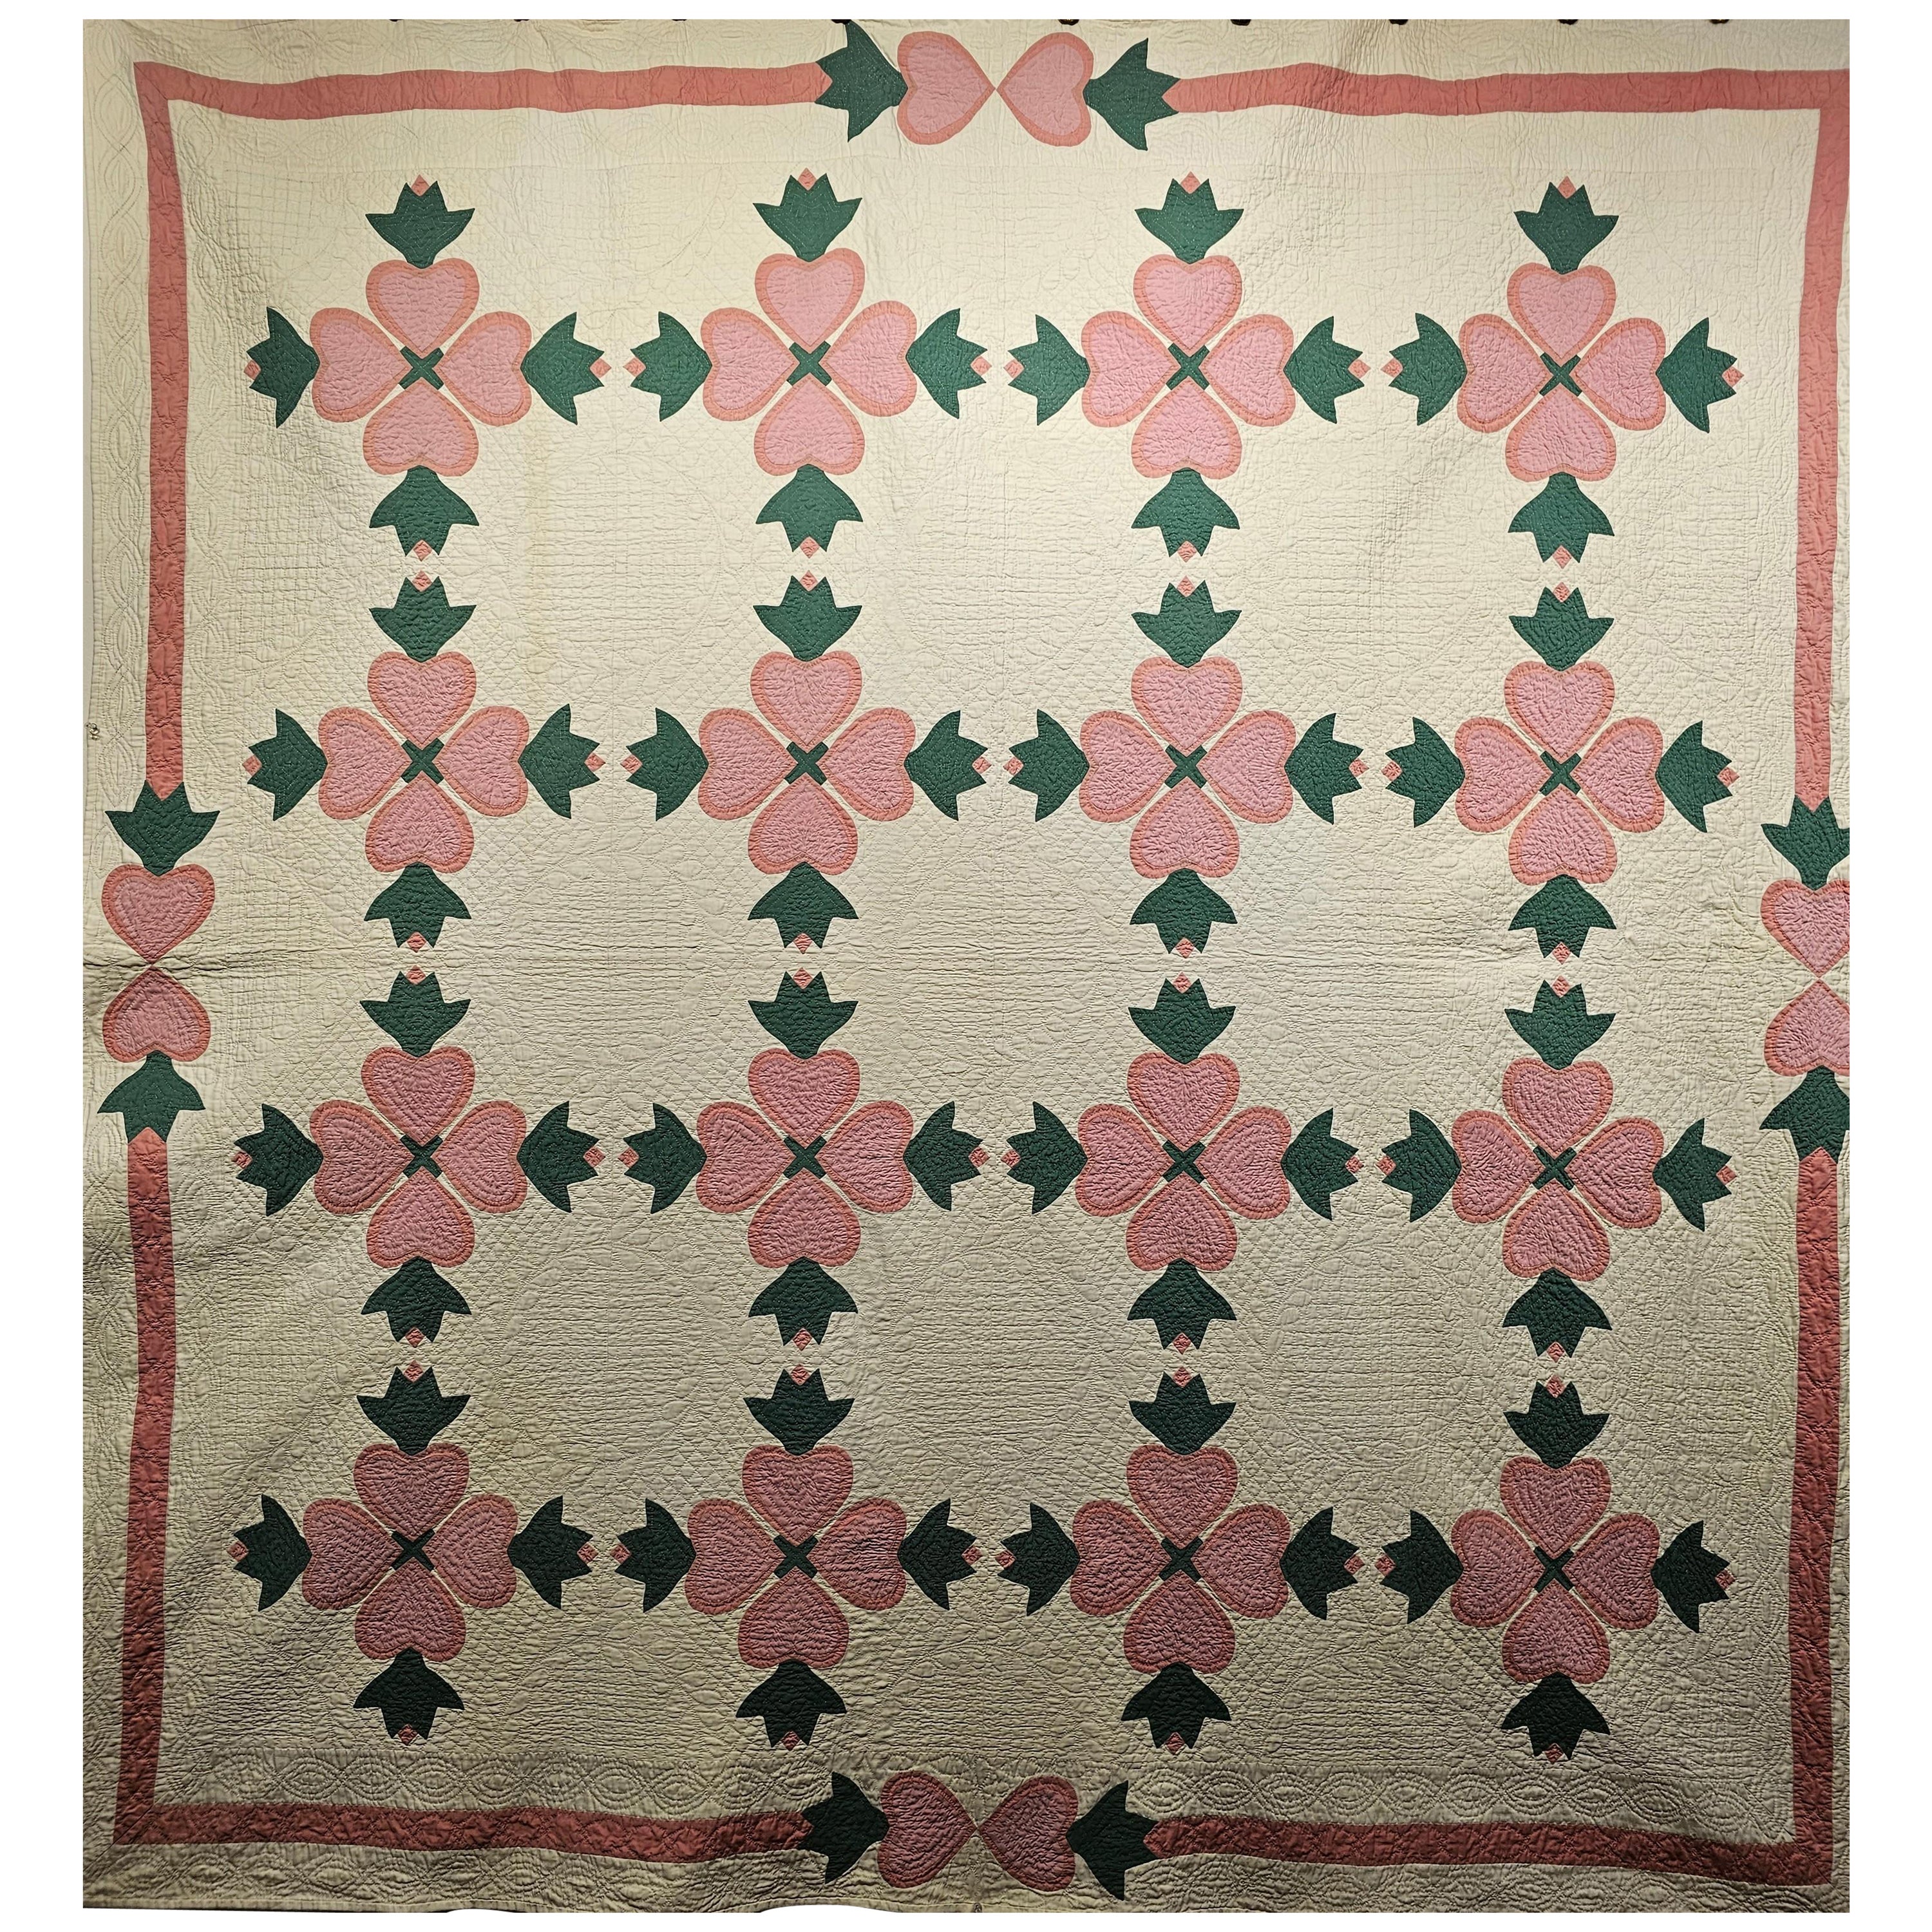 What is African American quilting?